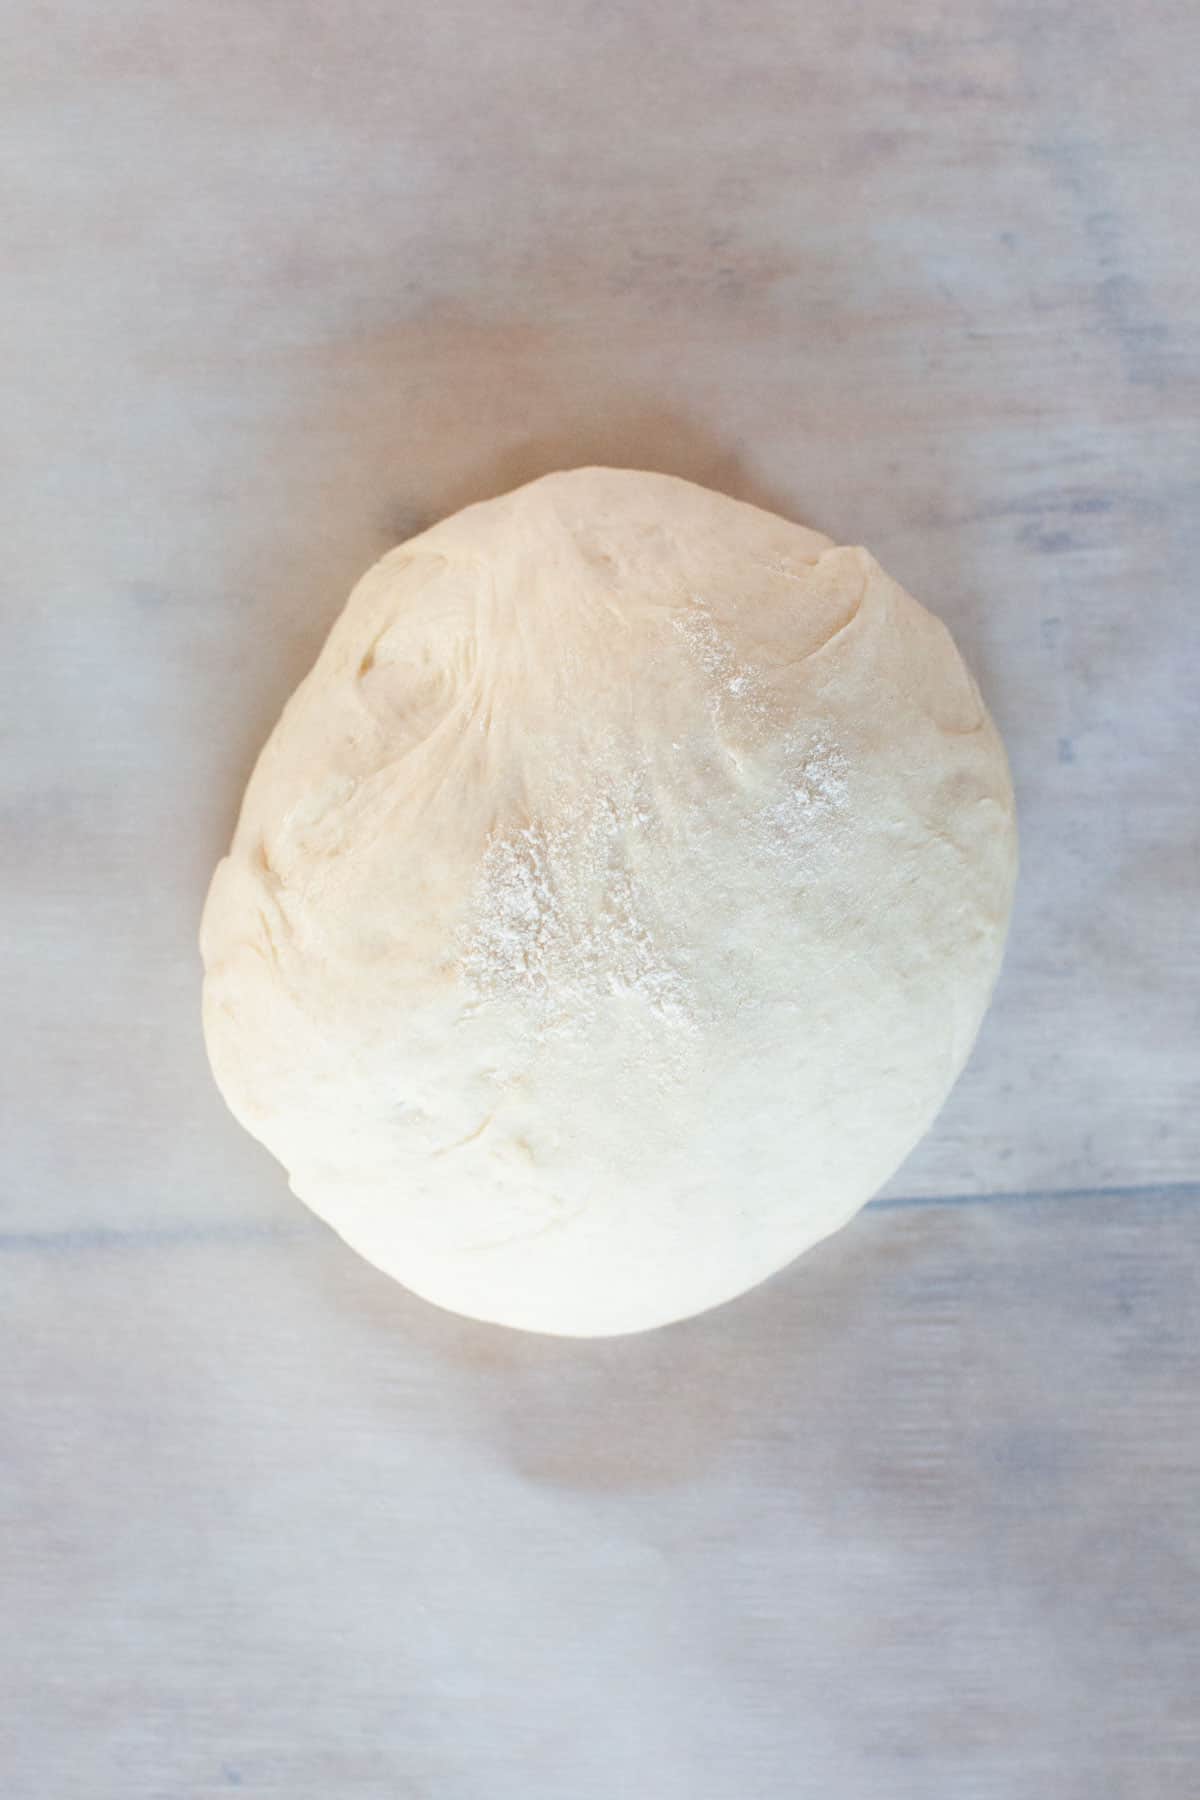 Thin crust pizza dough on parchment paper on wooden countertop.